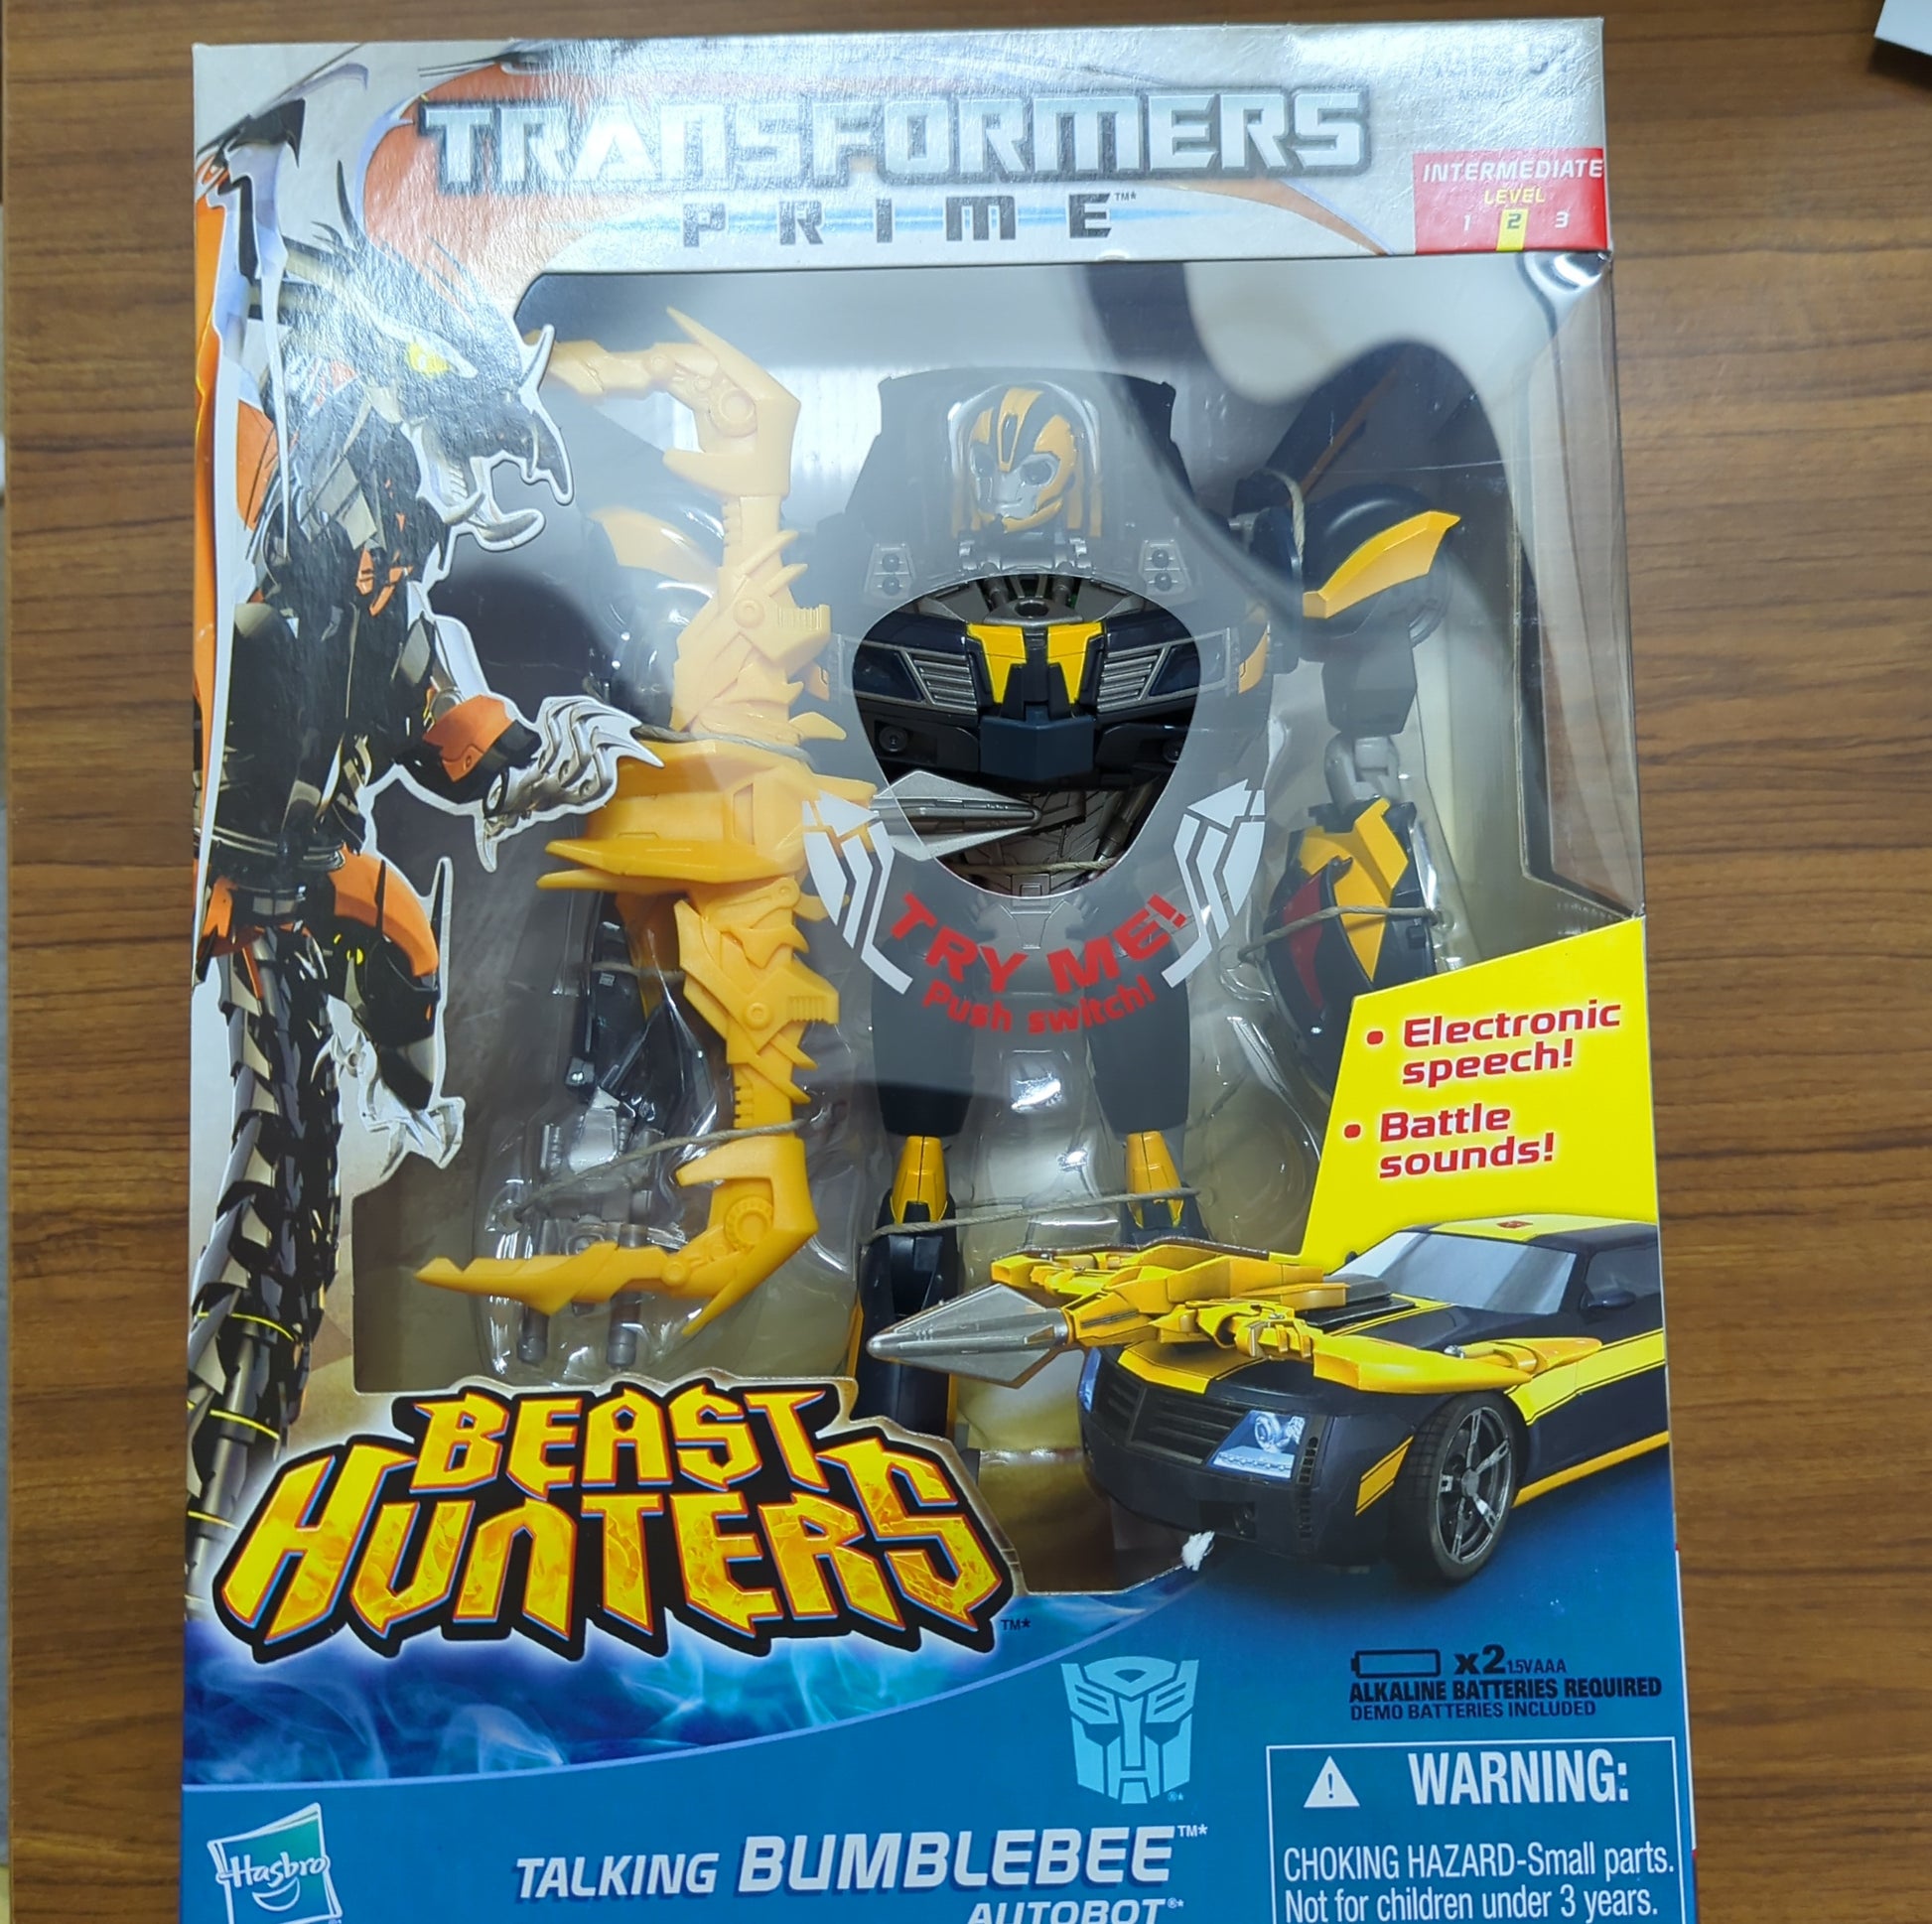 Transformers Prime Beast Hunters Talking Bumblebee Action Figure FRENLY BRICKS - Open 7 Days